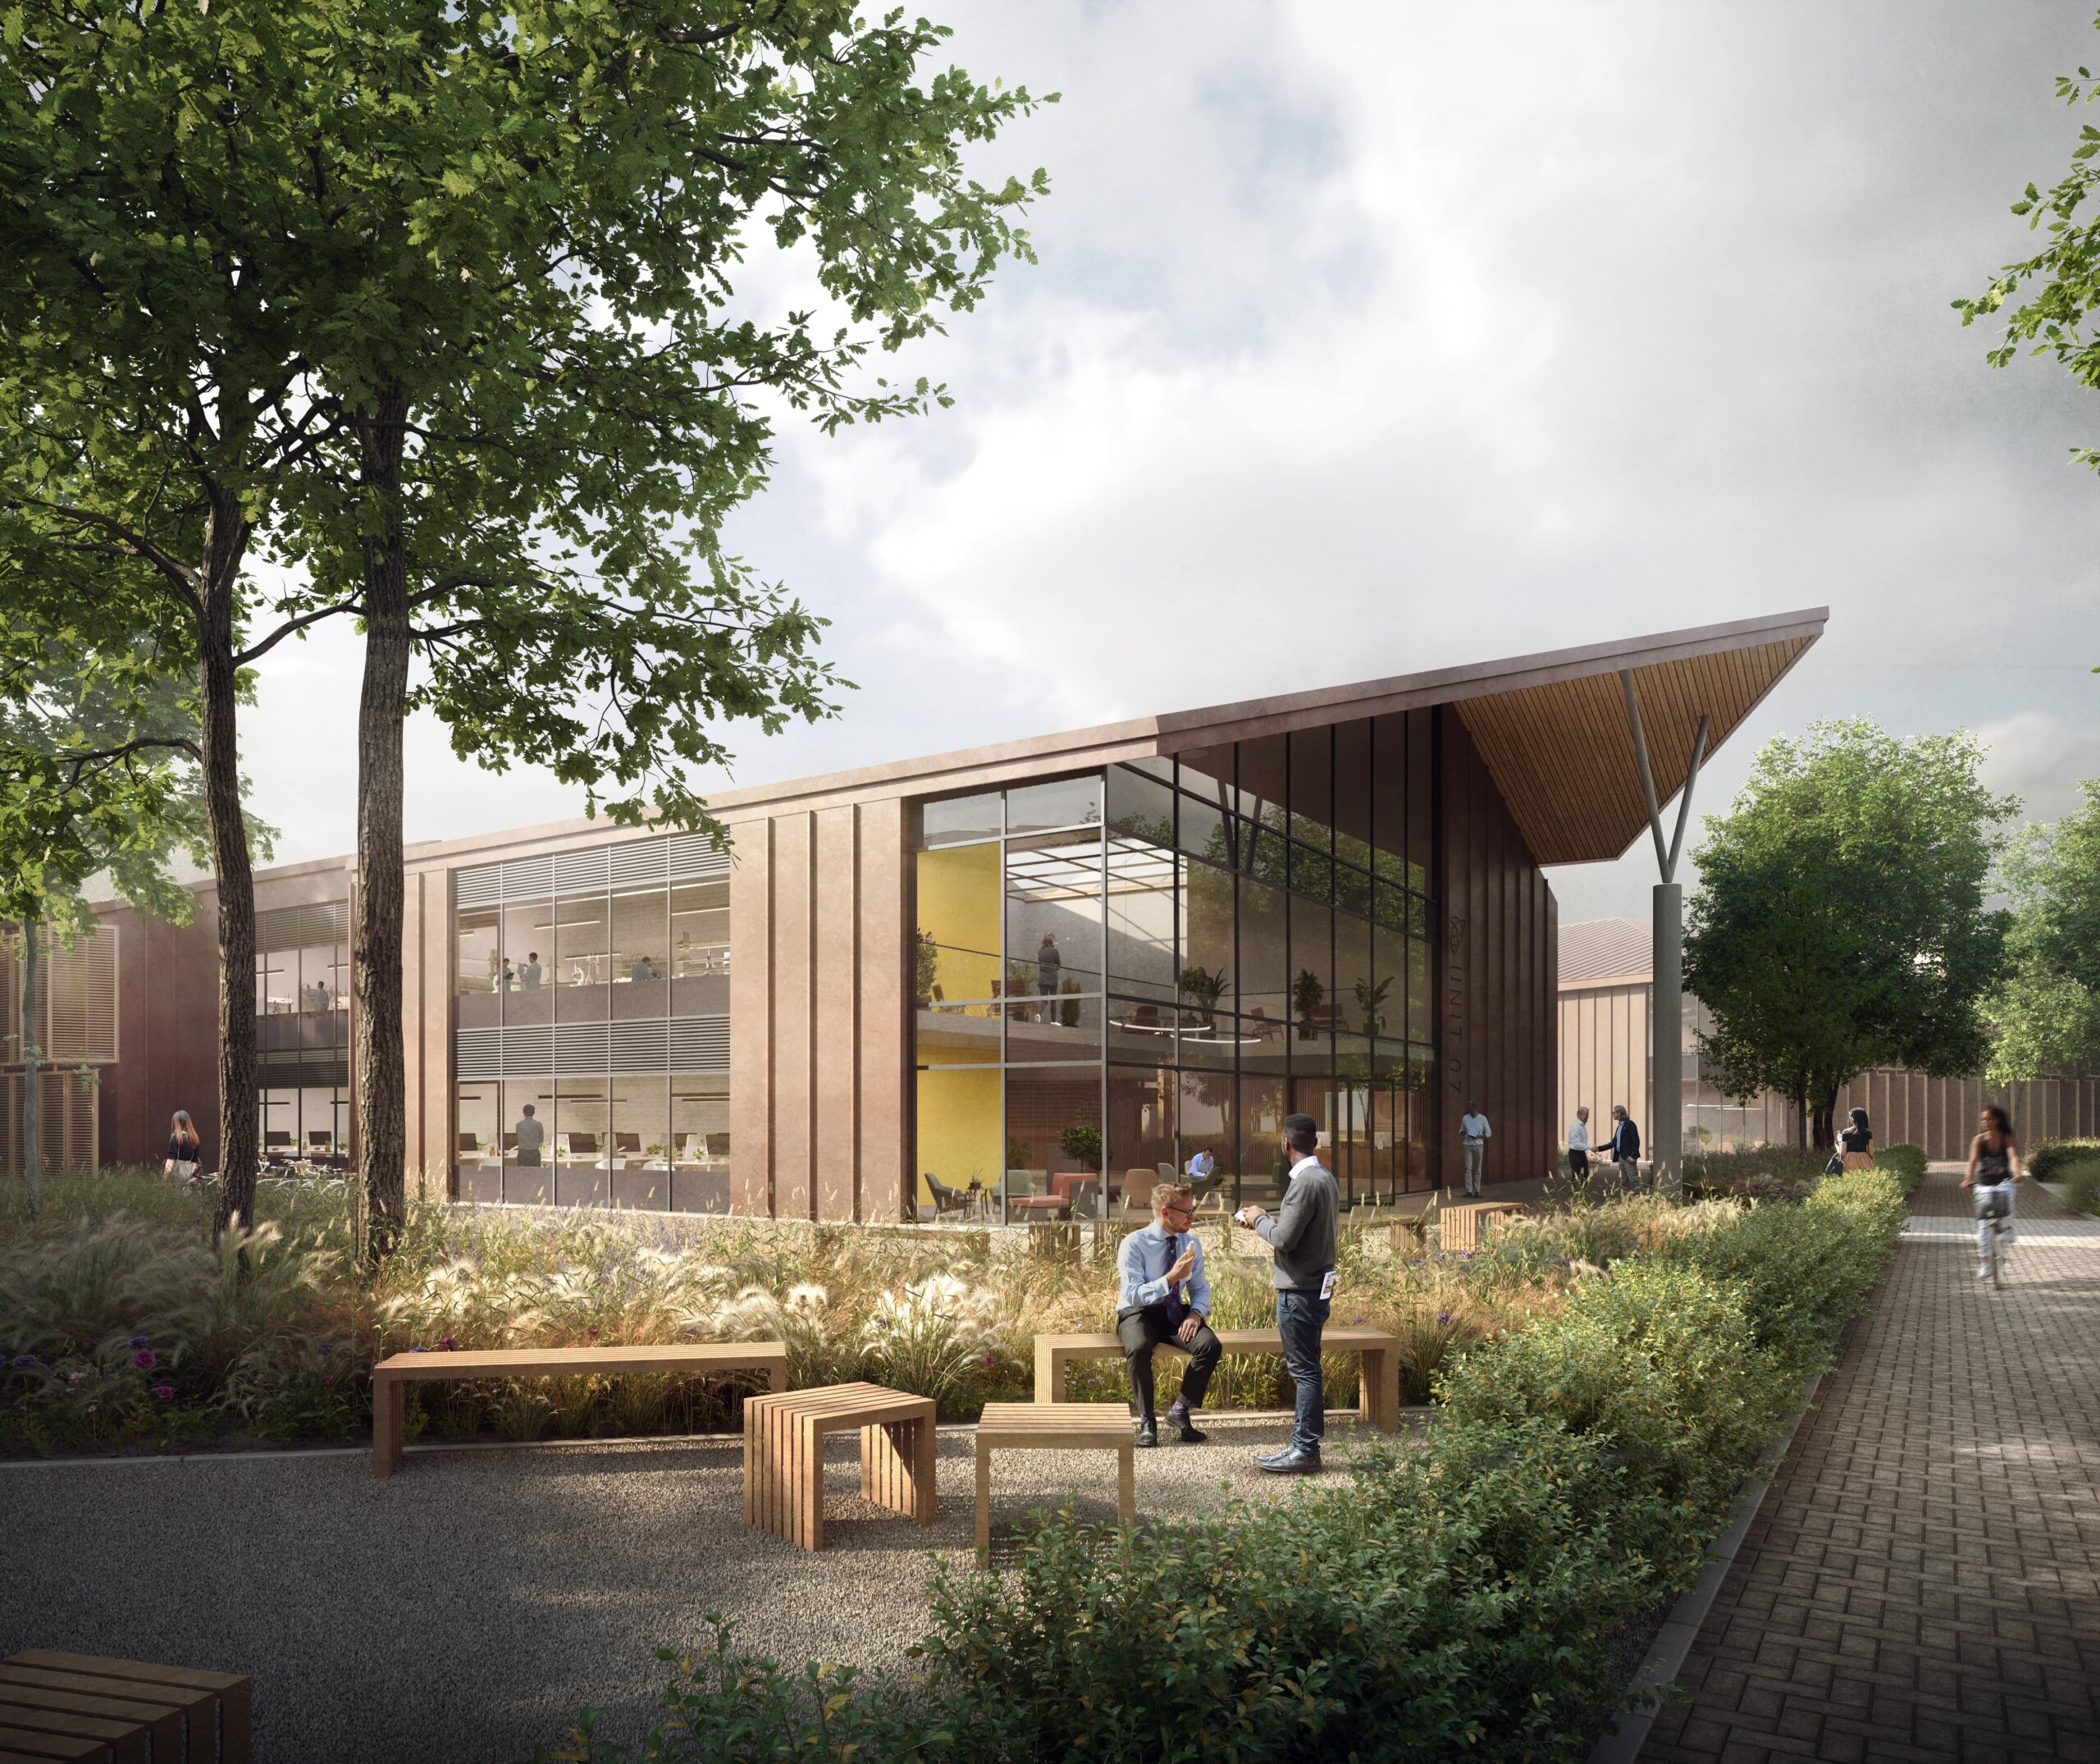 Cambridge Discovery Park planning application submitted